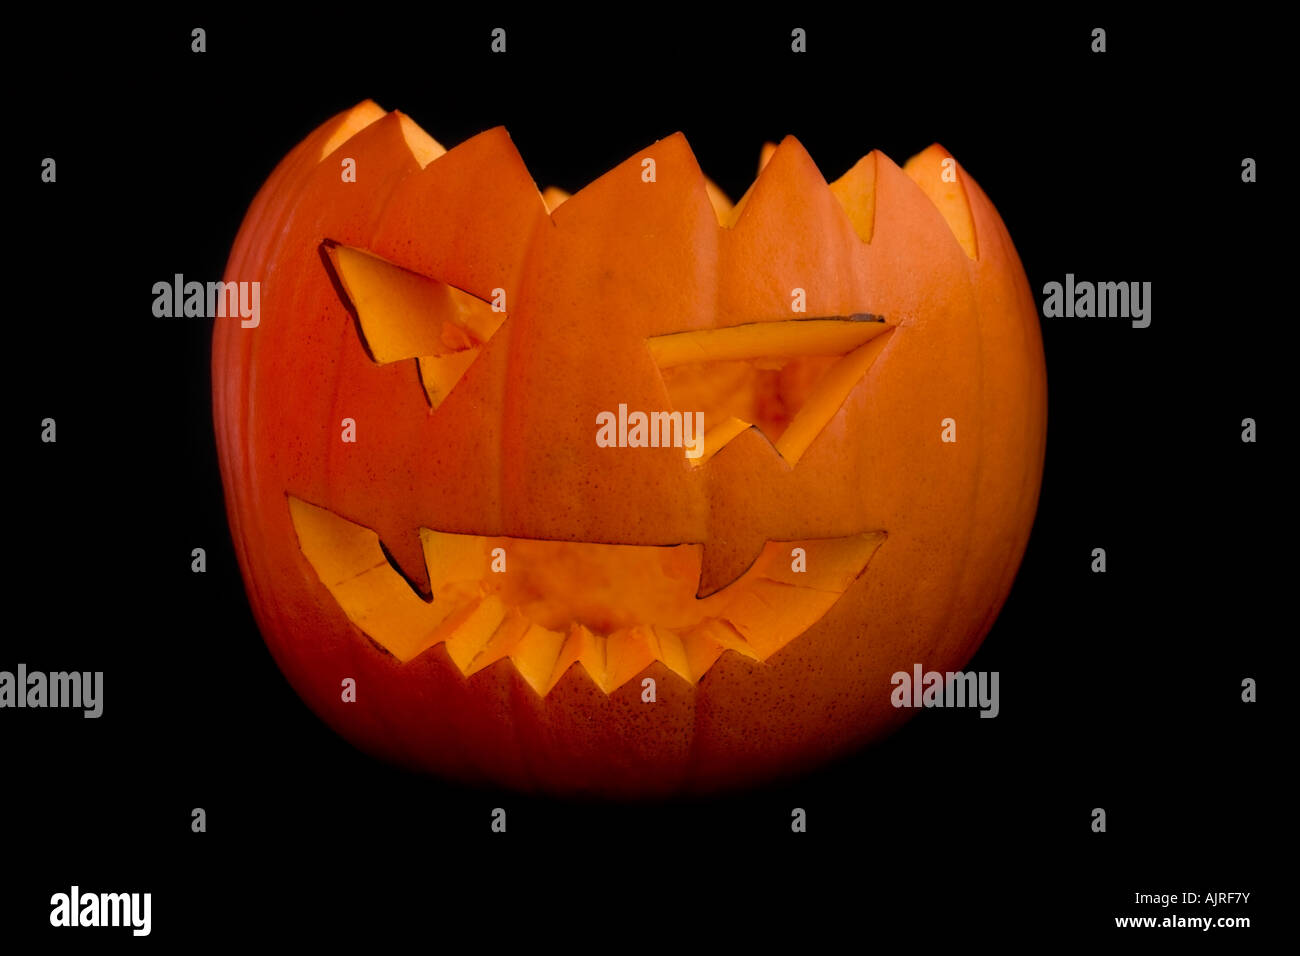 Halloween Orange pumpkin head lit by candle on a black background Stock Photo